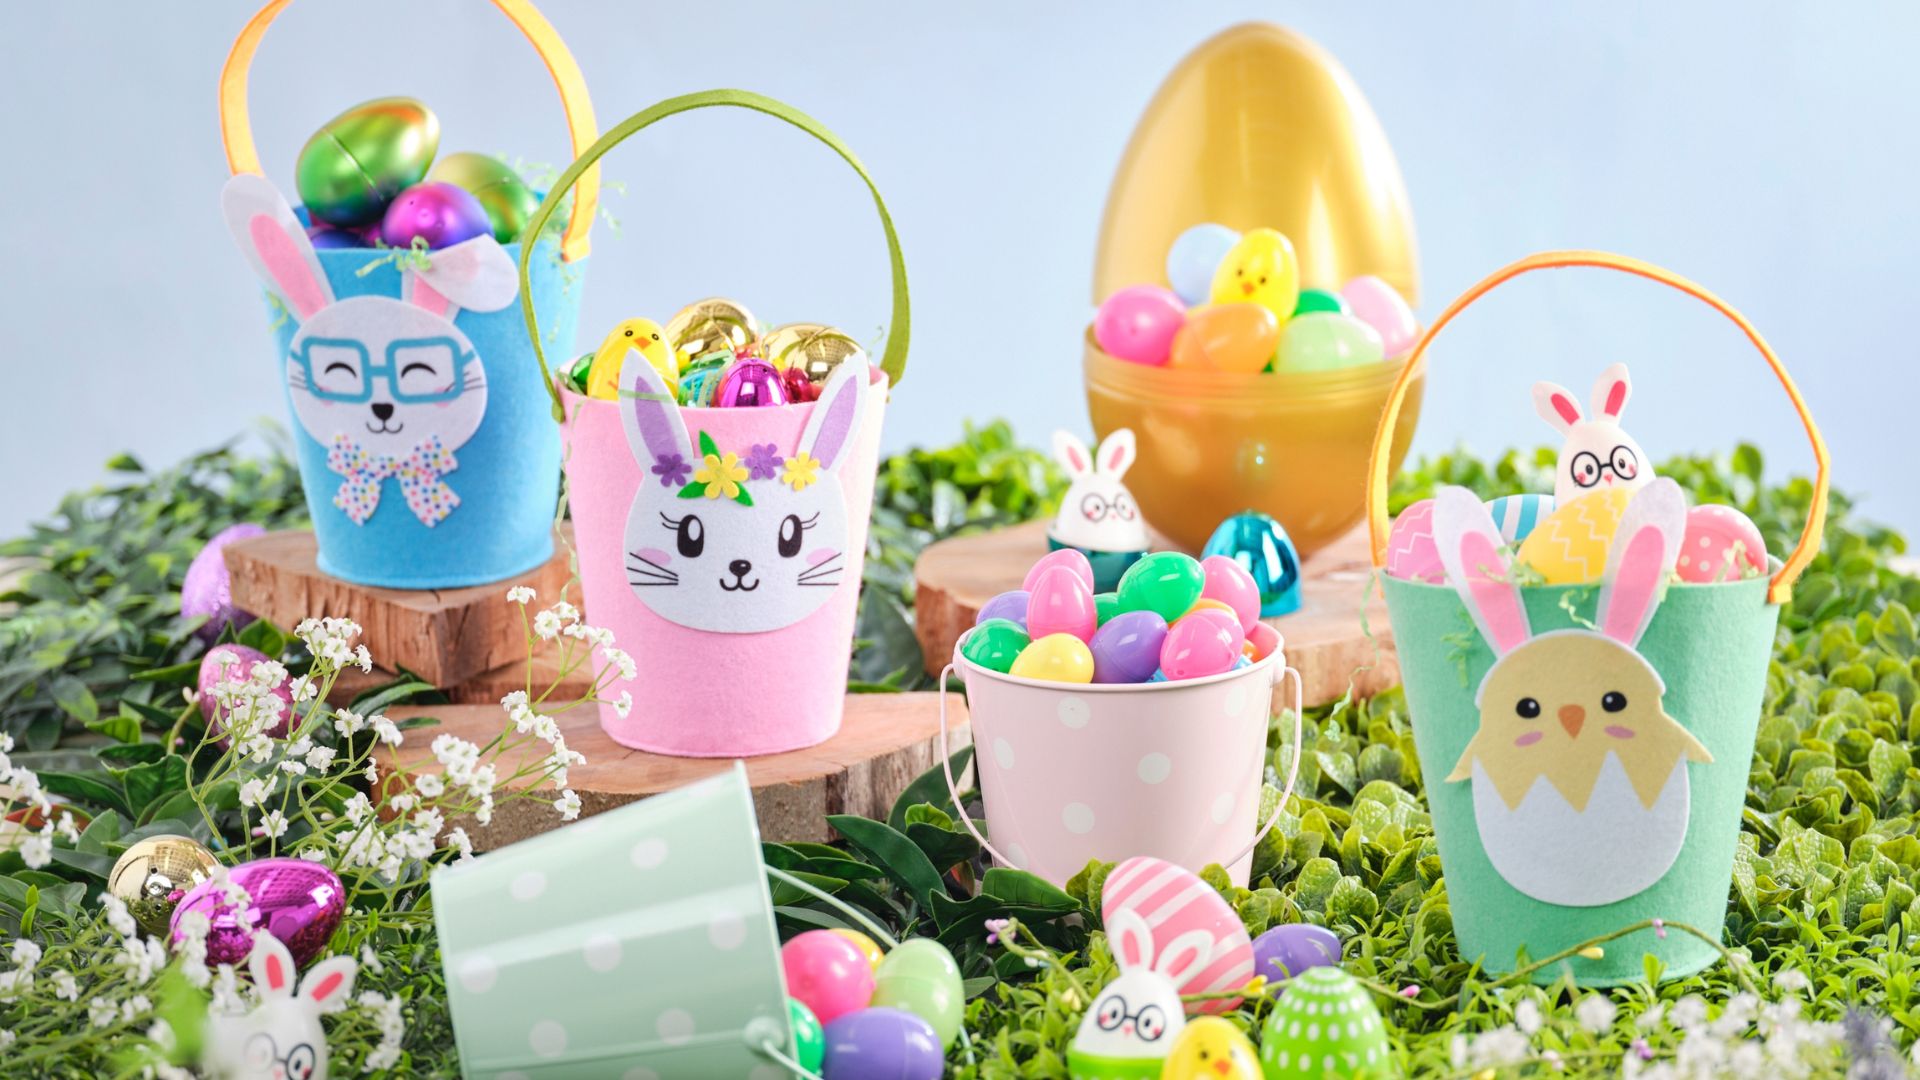 DIY pastel coloured decorated Easter egg hunting buckets